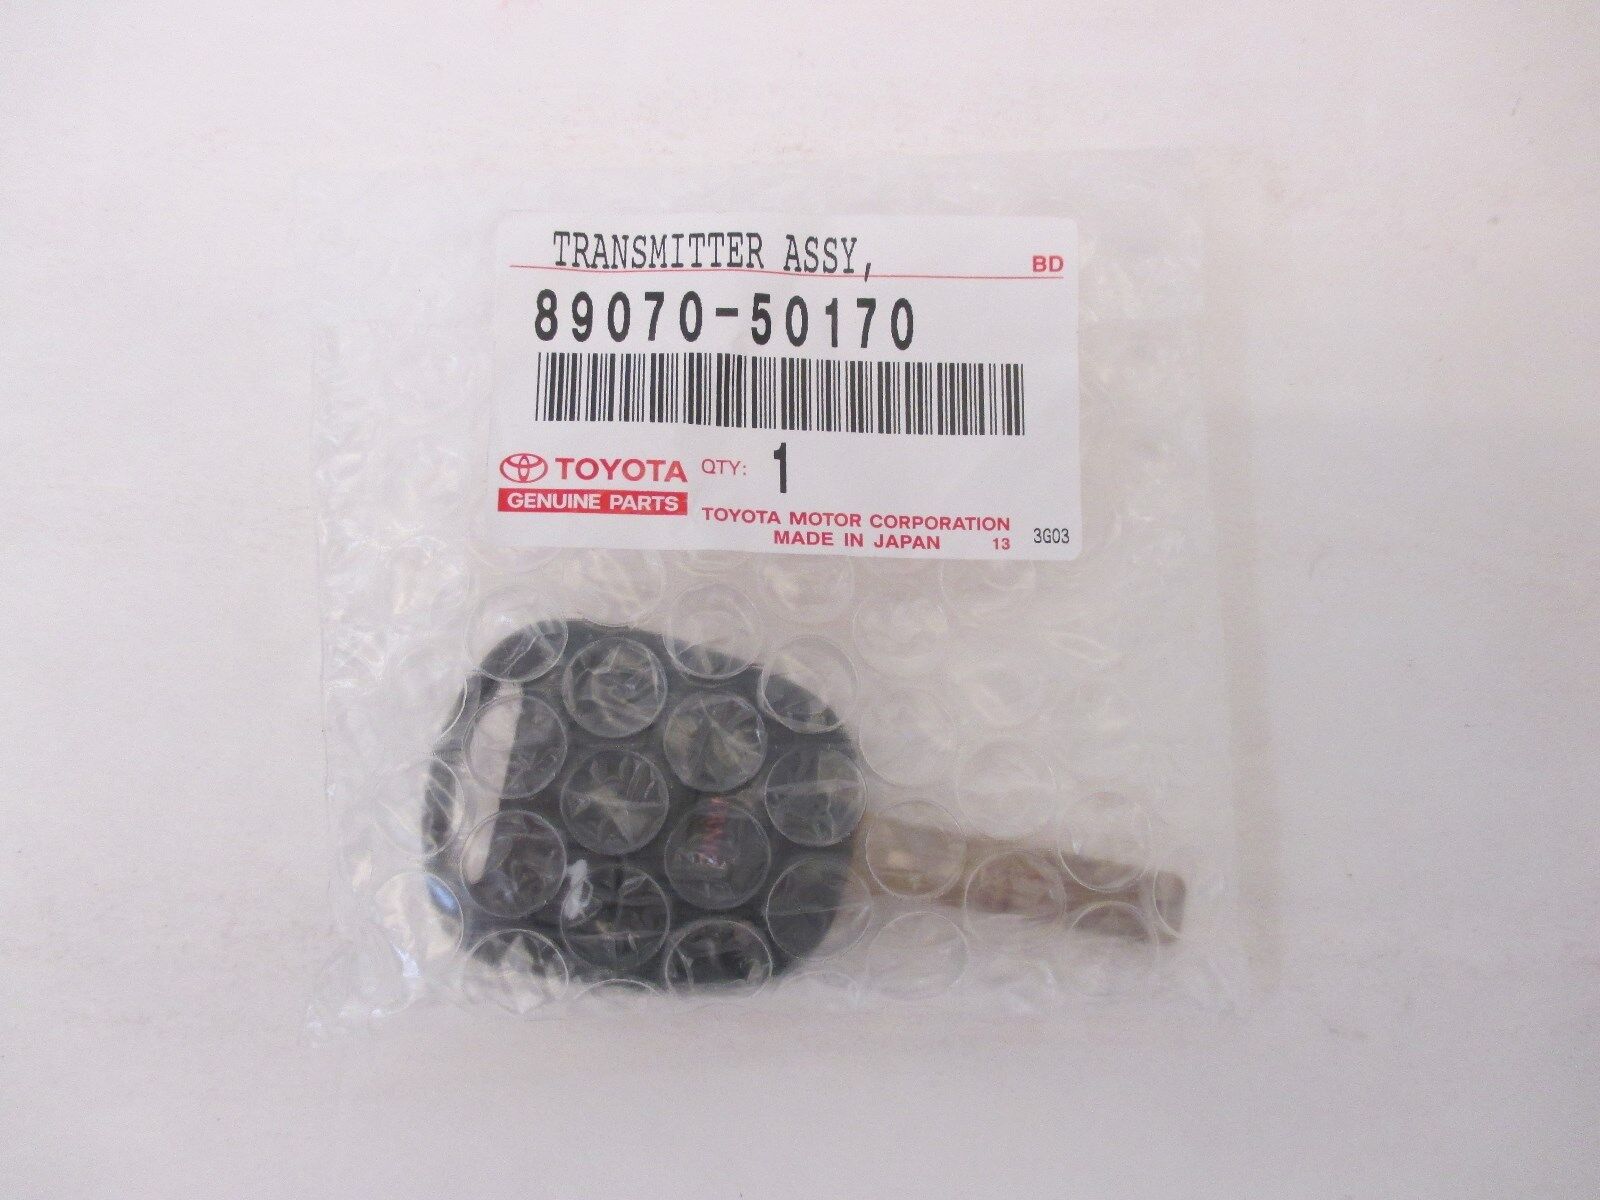 LEXUS OEM FACTORY MASTER KEY WITH REMOTE 1998-2000 LS400 89070-50170